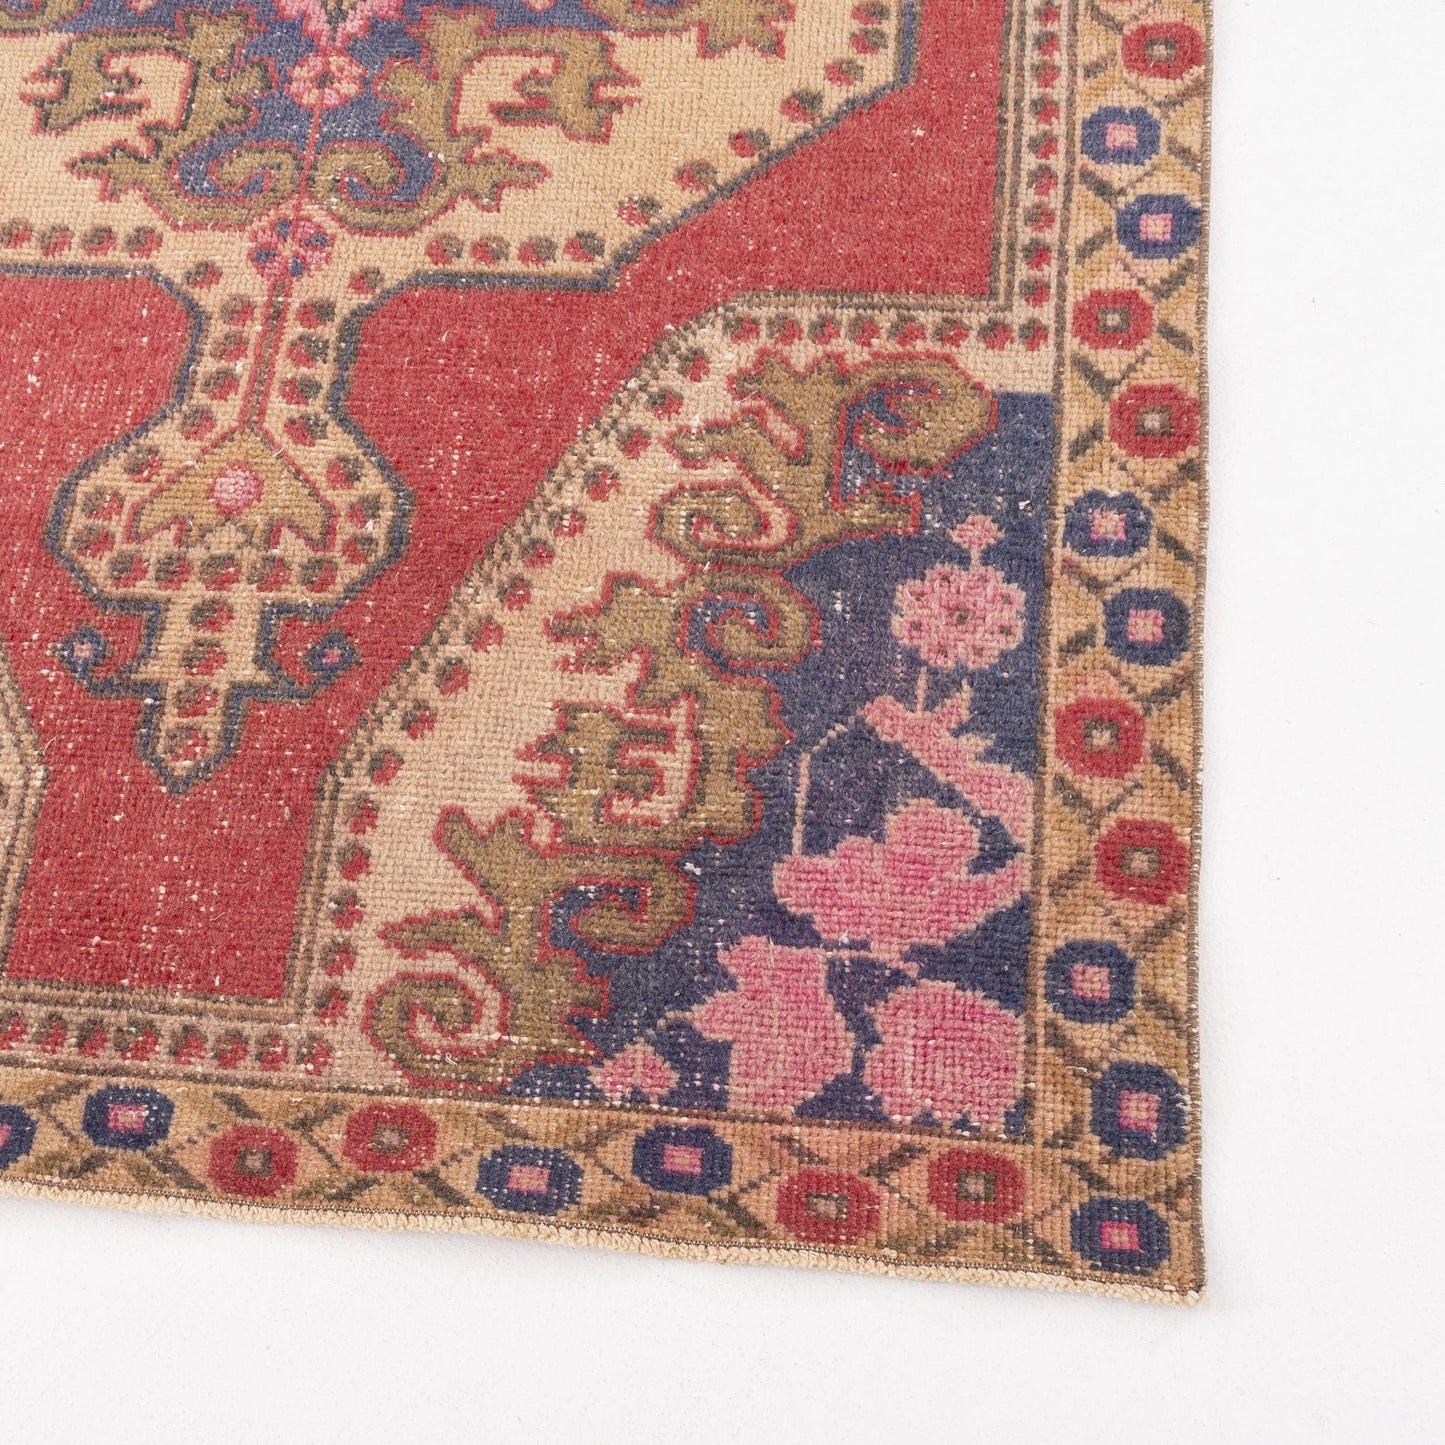 Oriental Rug Vintage Hand Knotted Wool On Cotton 137 X 210 Cm - 4' 6'' X 6' 11'' Red C014 ER12